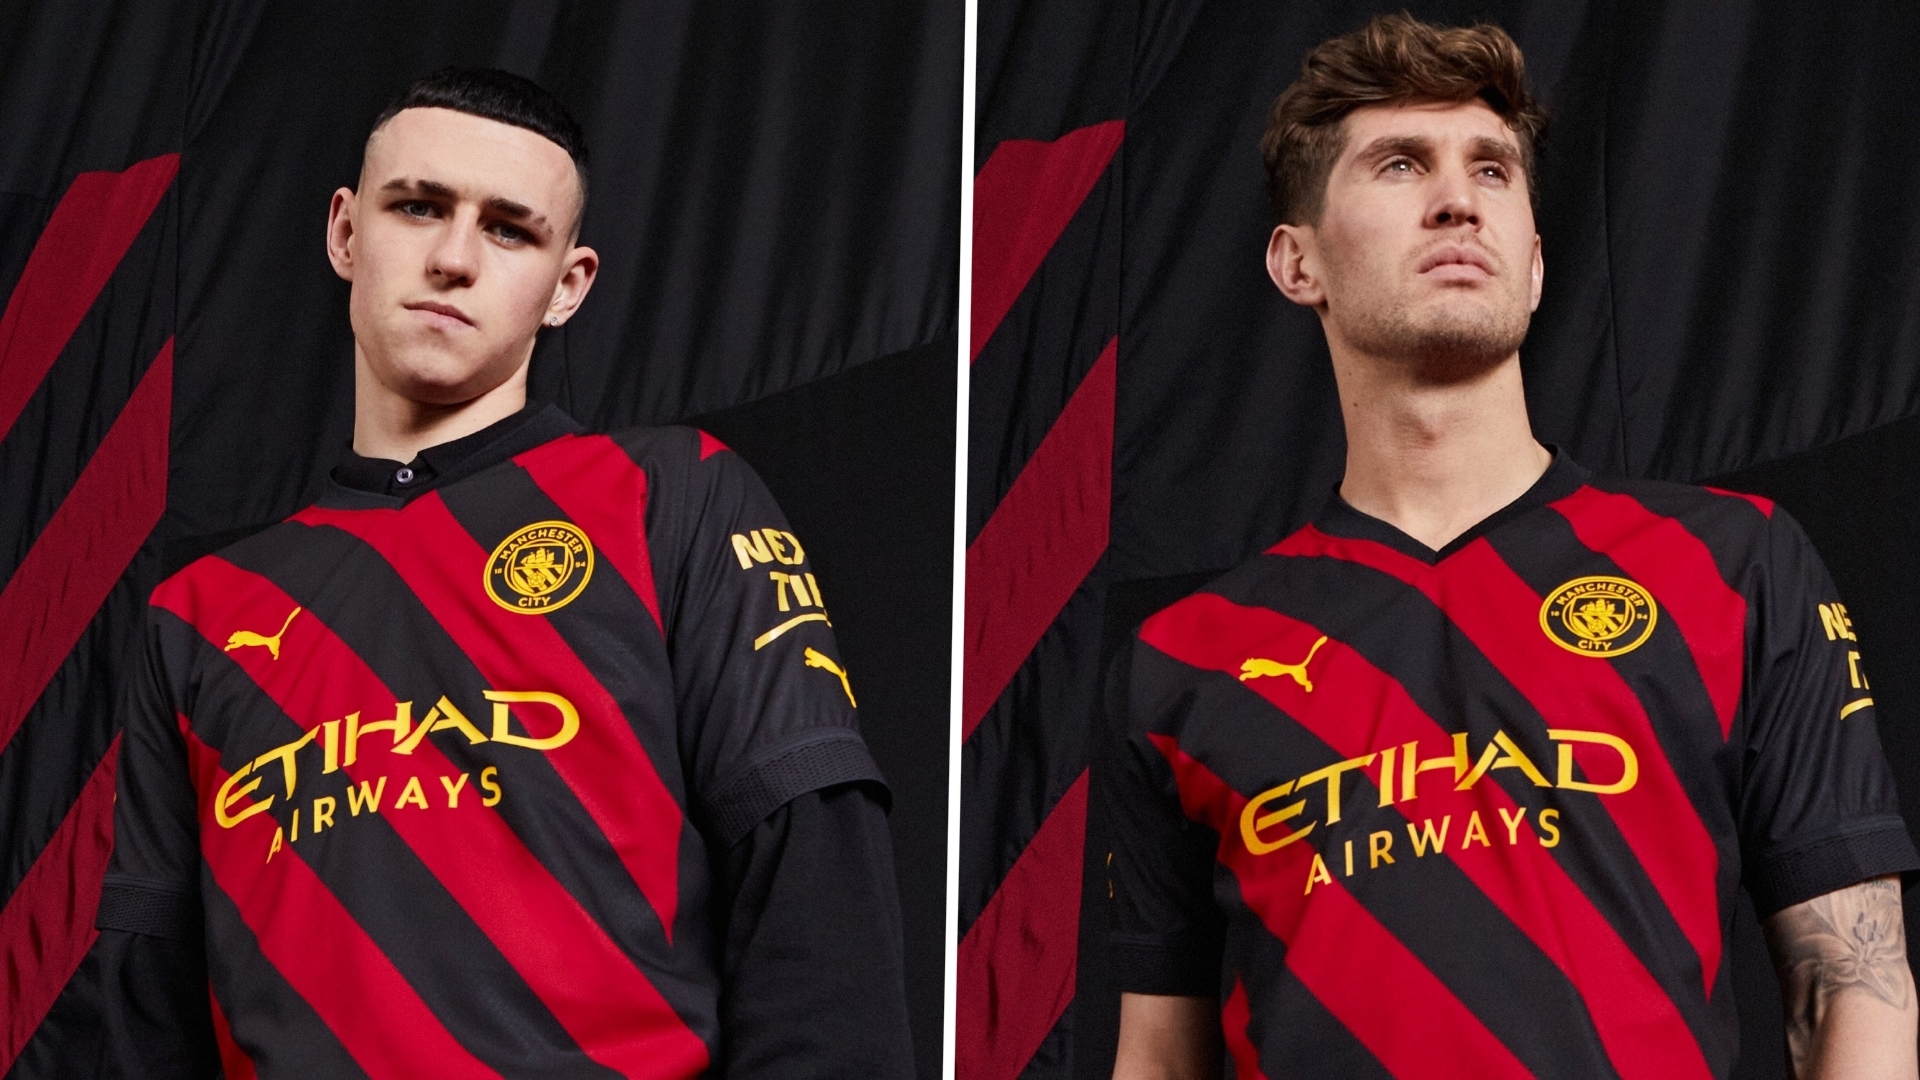 Man City Away Kit For 2022 23 Puts Modern Twist On Classic Designs From 1960s & 70s